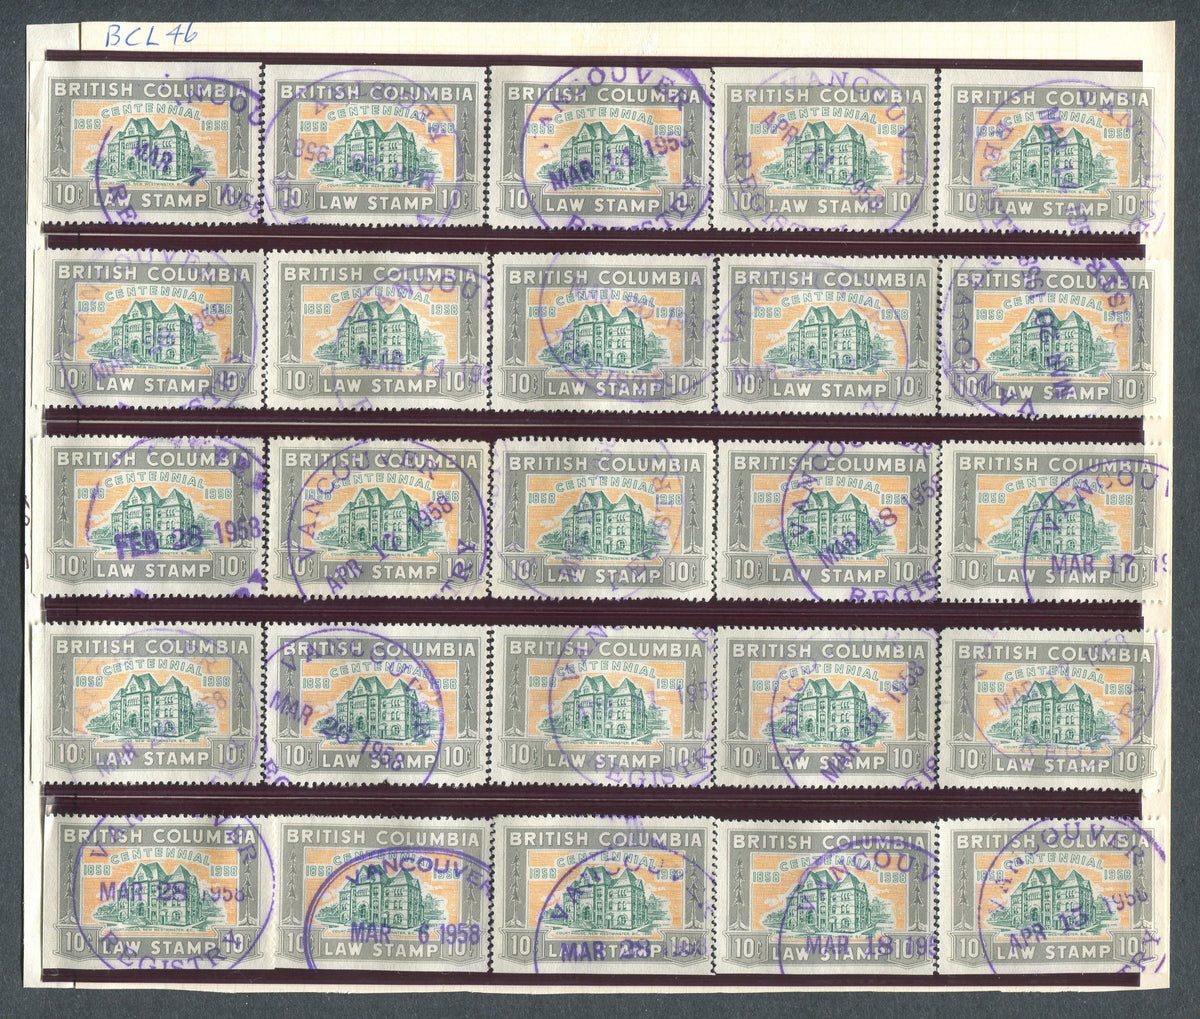 0046BC1709 - BCL46 - Used Reconstructed Sheet